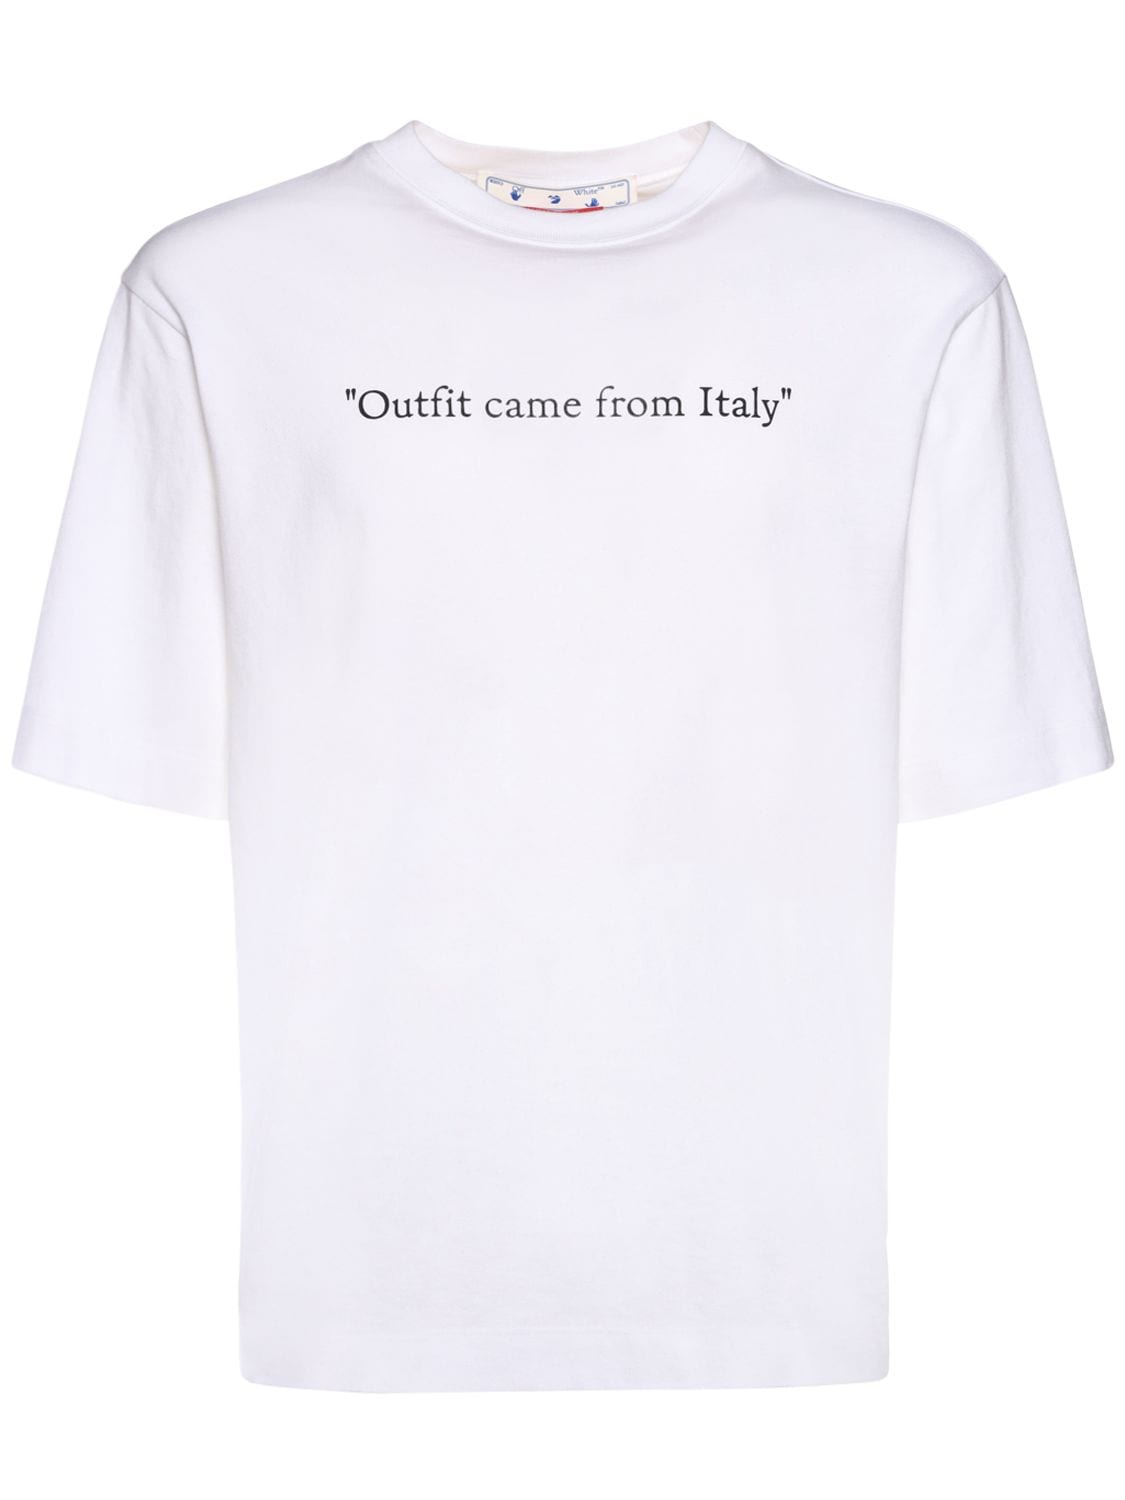 From Italy Printed Cotton T-shirt